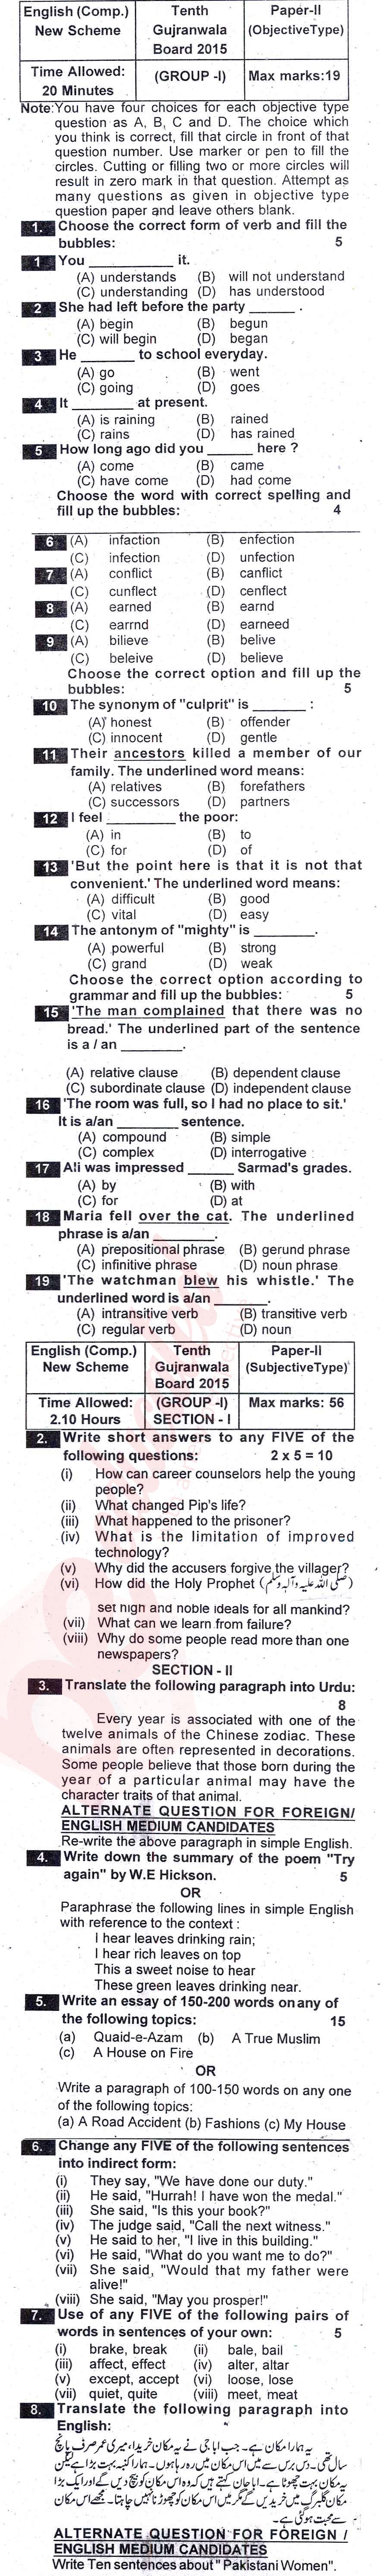 English 10th class Past Paper Group 1 BISE Gujranwala 2015